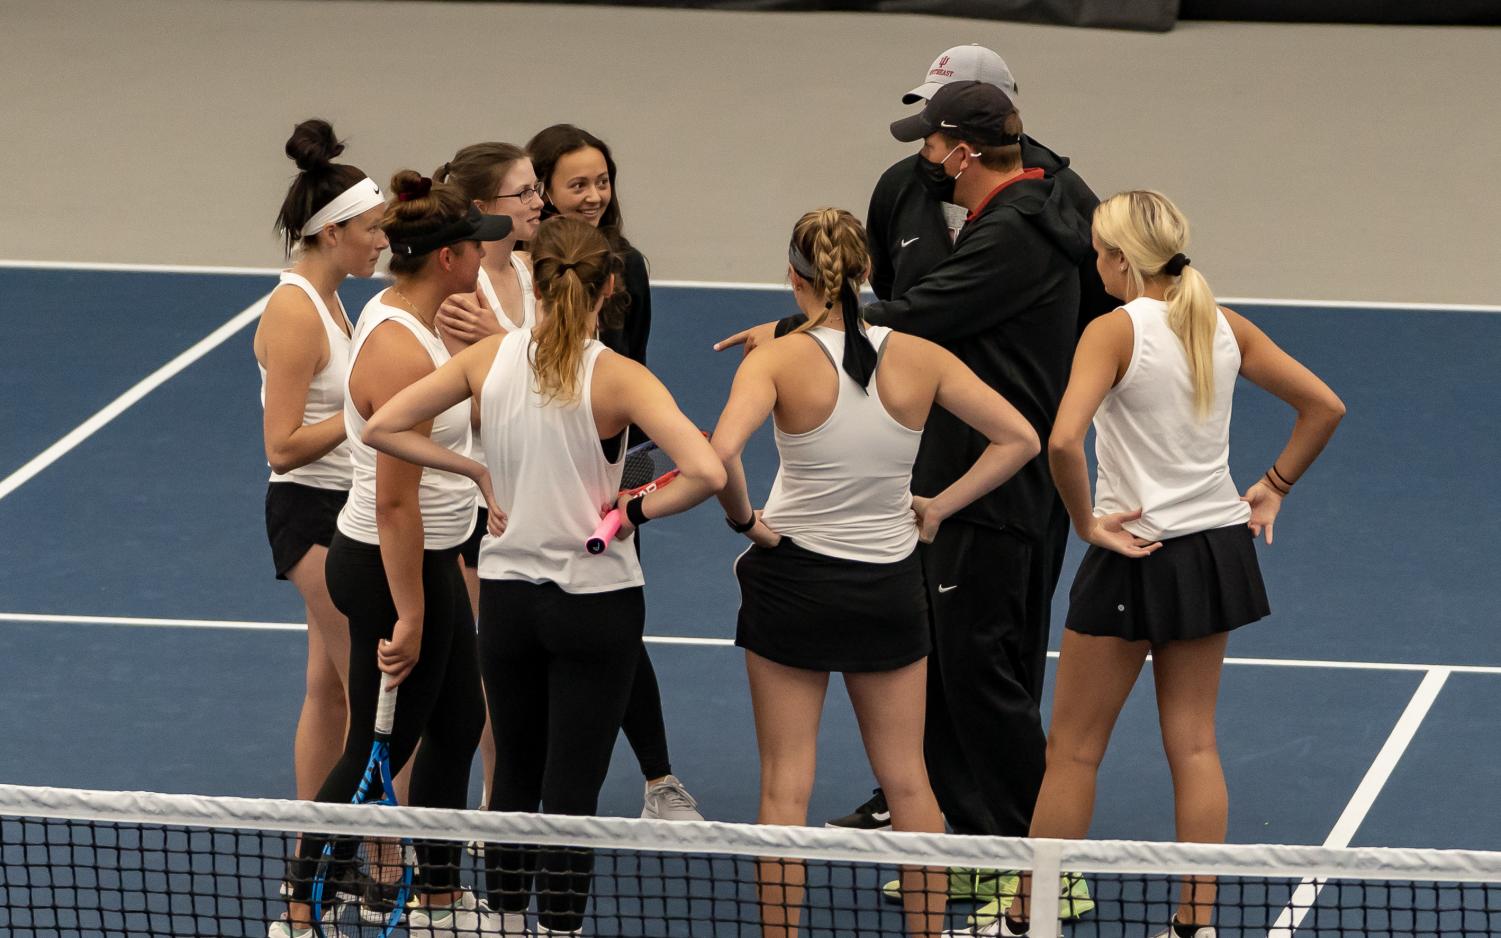 Head coach Joe Epkey gives his Grenadier womens tennis squad a pep talk prior to the singles portion of their RSC Semifinal matchup against IU East on April 23.